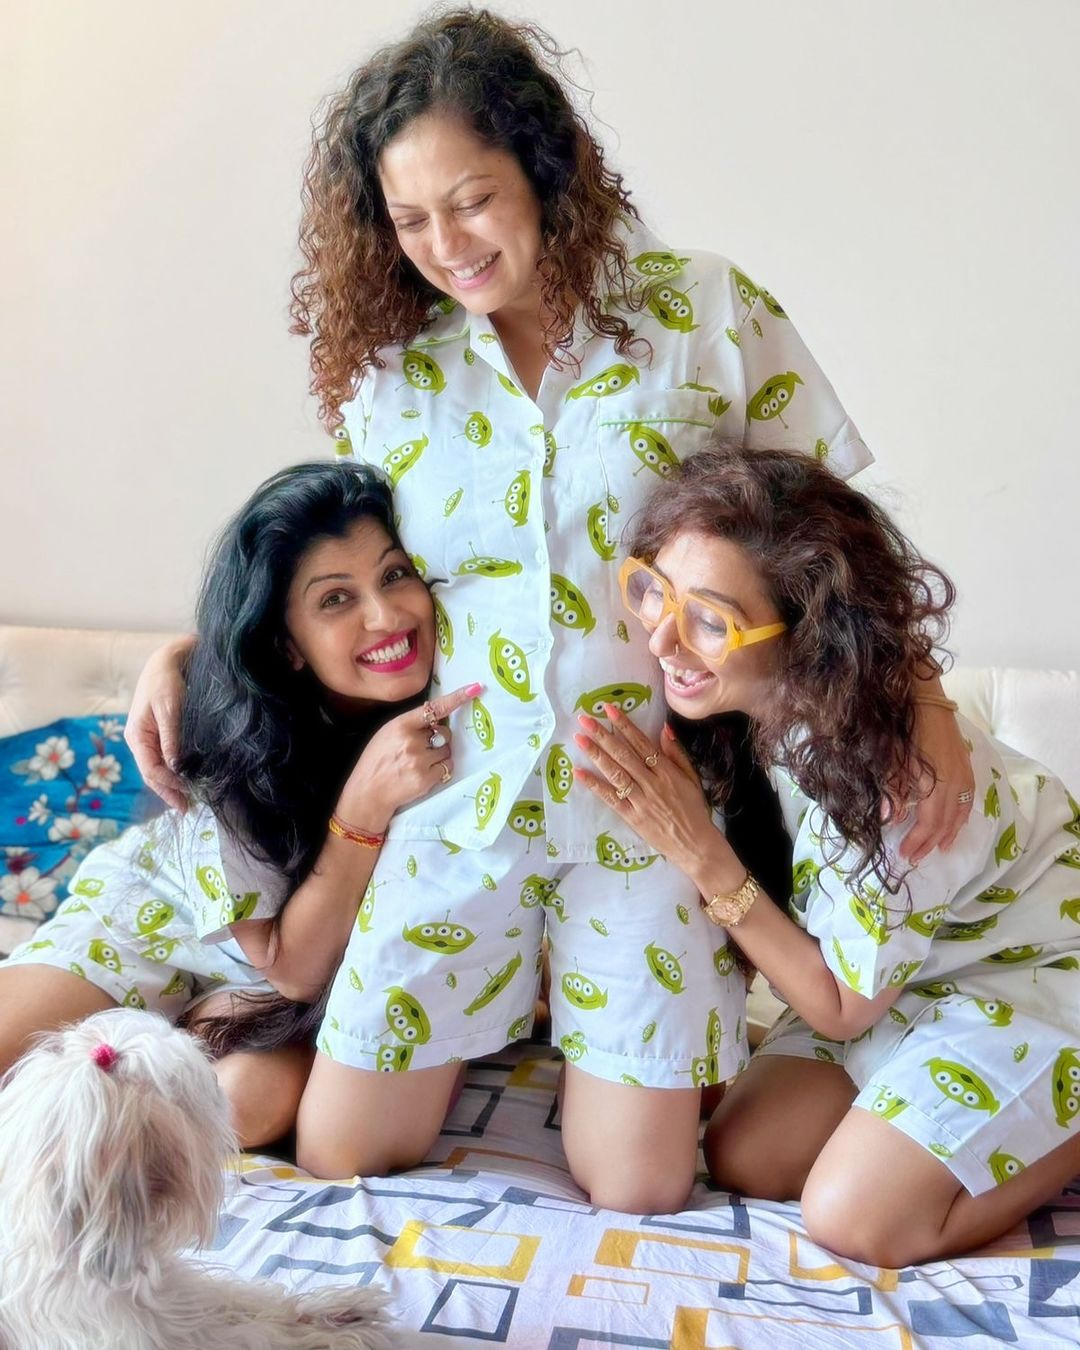 Drashti Dhami's Madhubala Co-Stars Arti Puri And Pallavi Purohit Shared A Whale Of Time. Check Out How Their Pictures Speak To Their Bond!